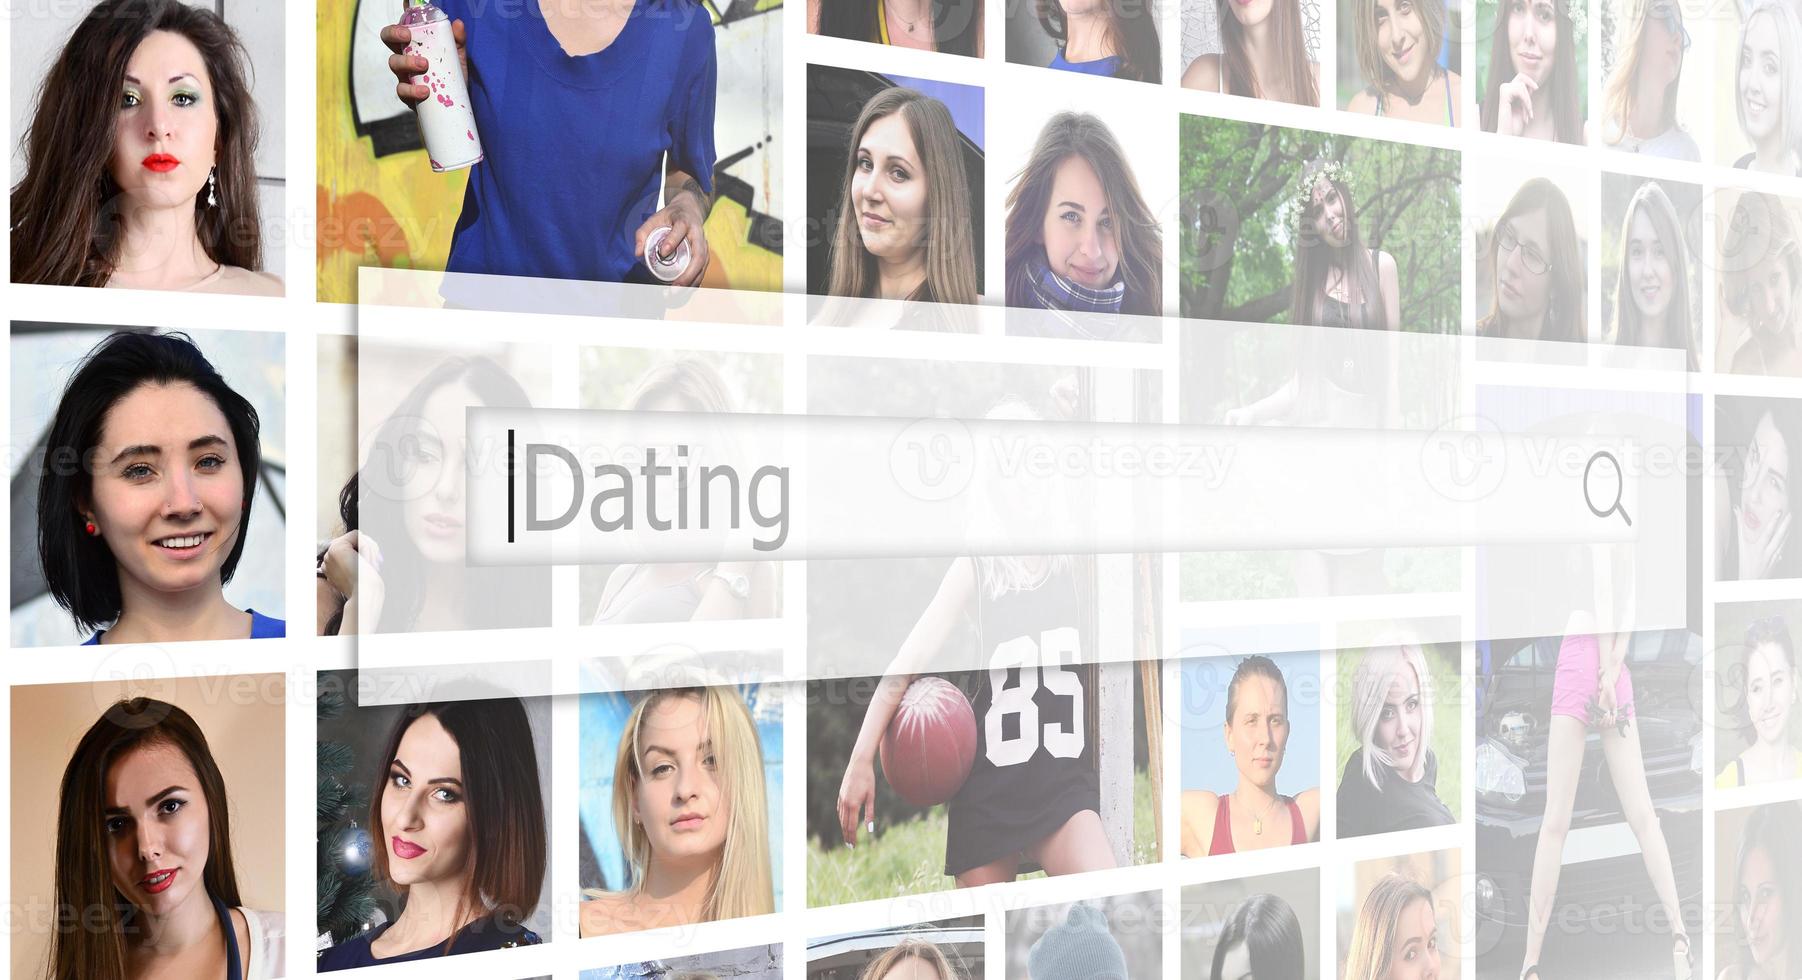 Dating. The text is displayed in the search box on the backgroun photo